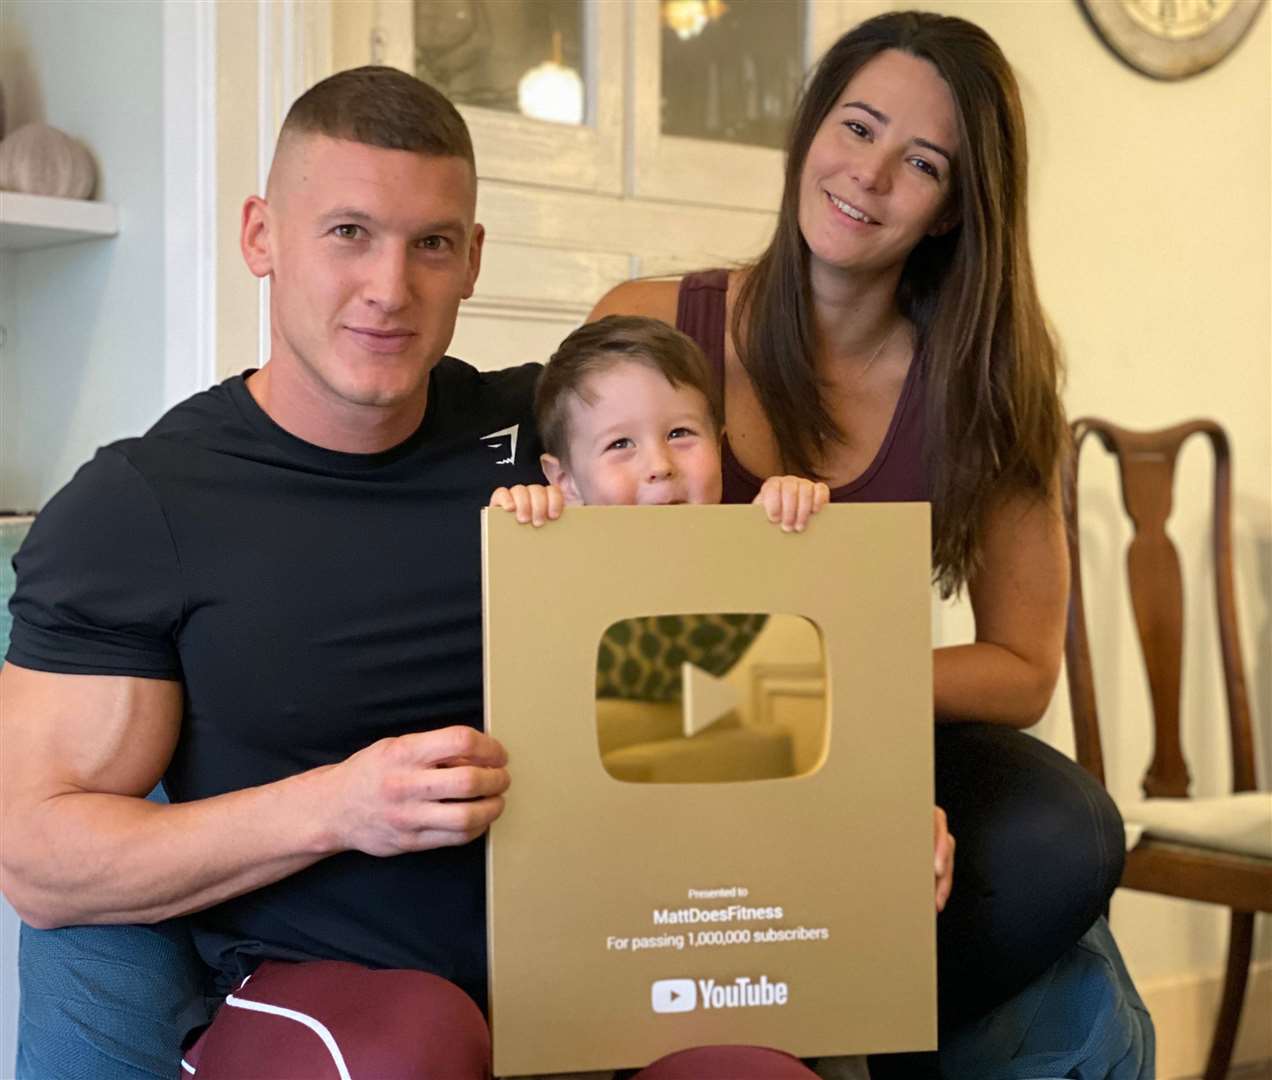 Matt, Sarah and three-year-old Luca with a YouTube Creator Award for gaining a million subscribers to the MattDoesFitness channel